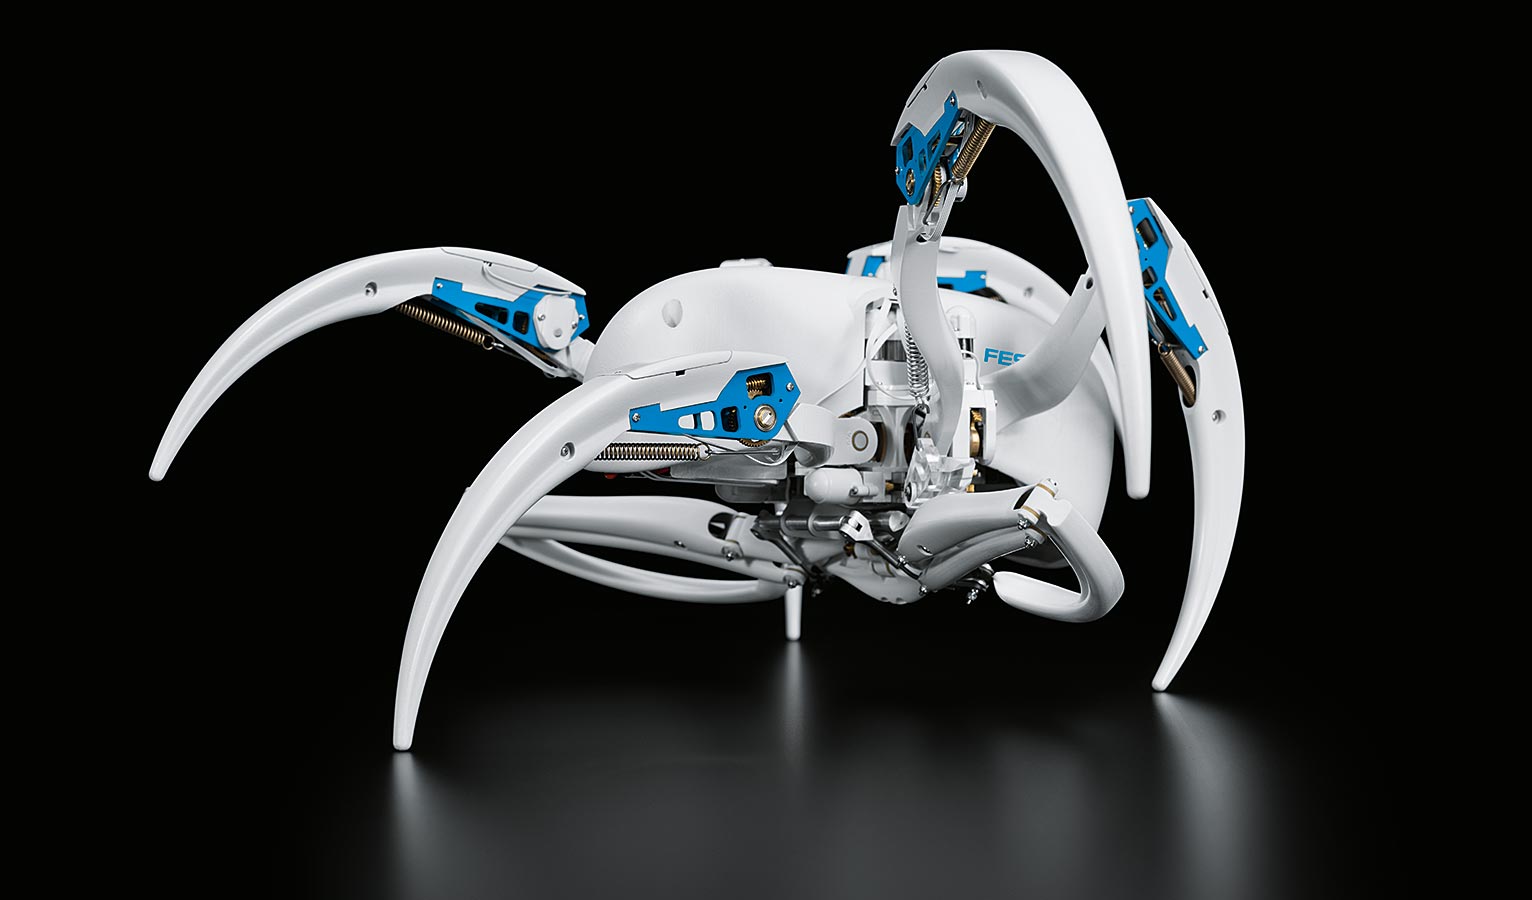 With three legs in contact with the ground at any given time in walking mode, BionicWheelBot remains stable even over rough terrain. Source: Festo